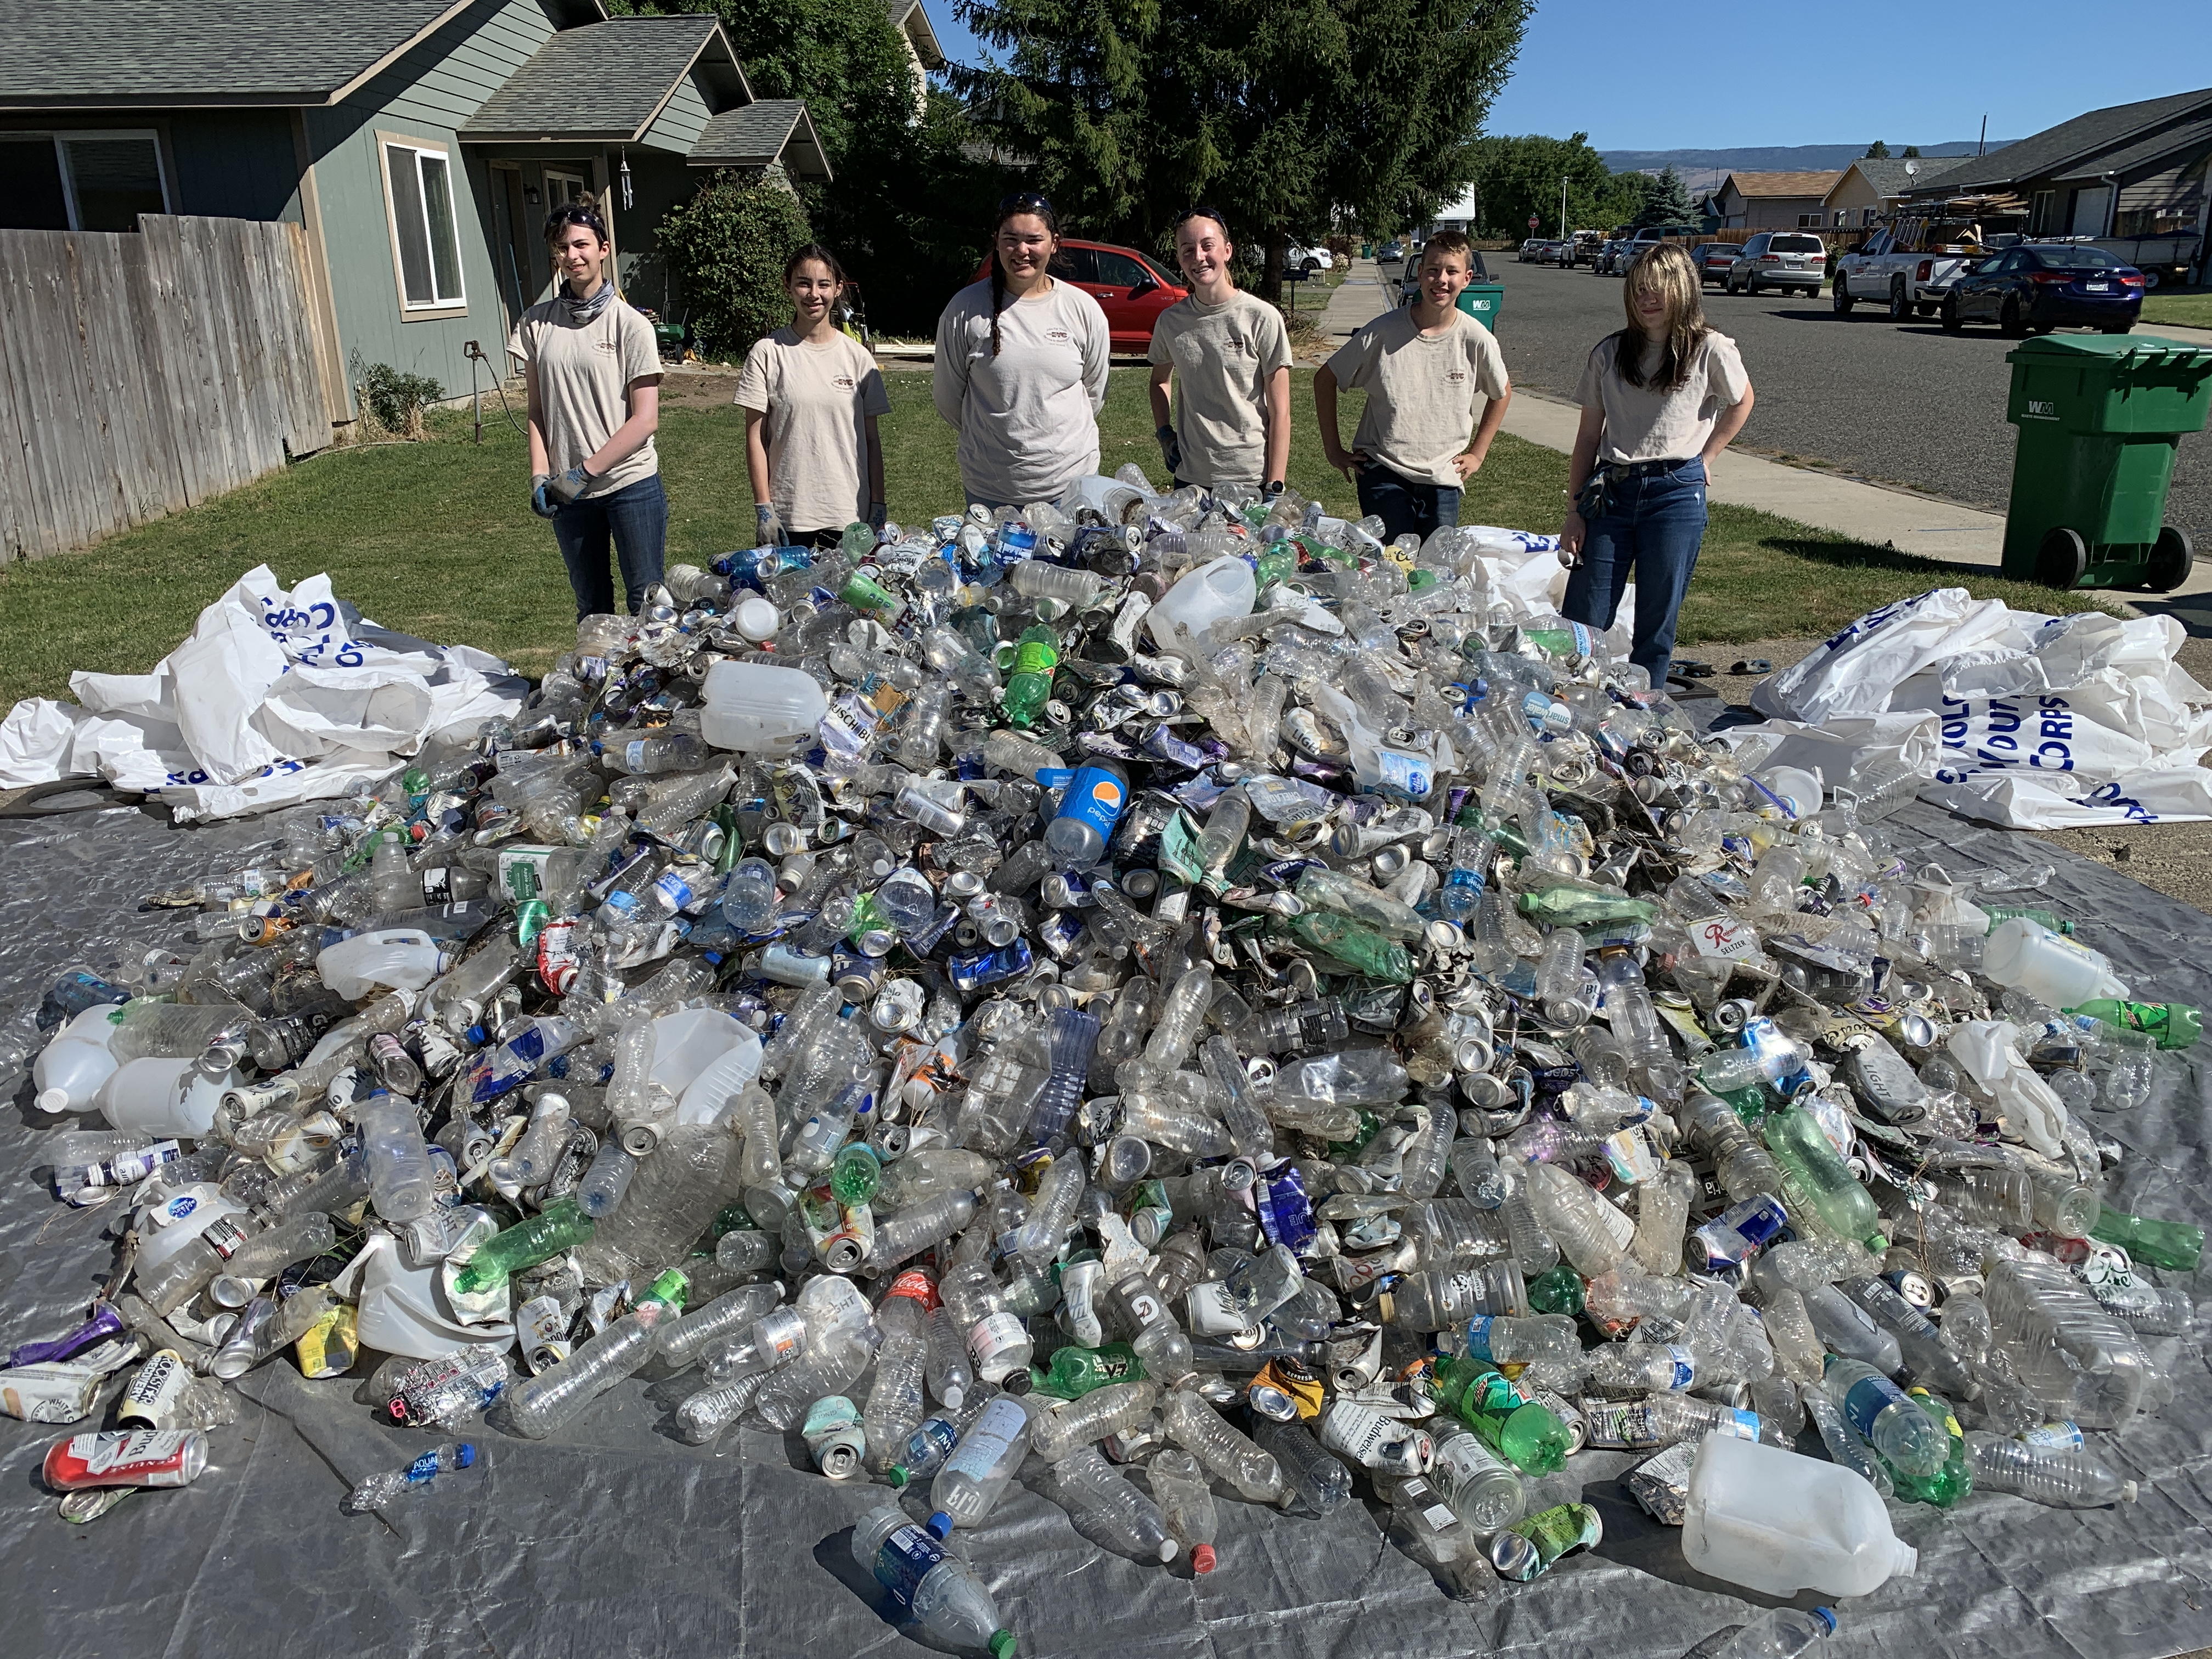 On a sunny day, six teens in light shirts smile at the camera from behind a large pile of plastic bottles and aluminum cans spread on a gray tarp.